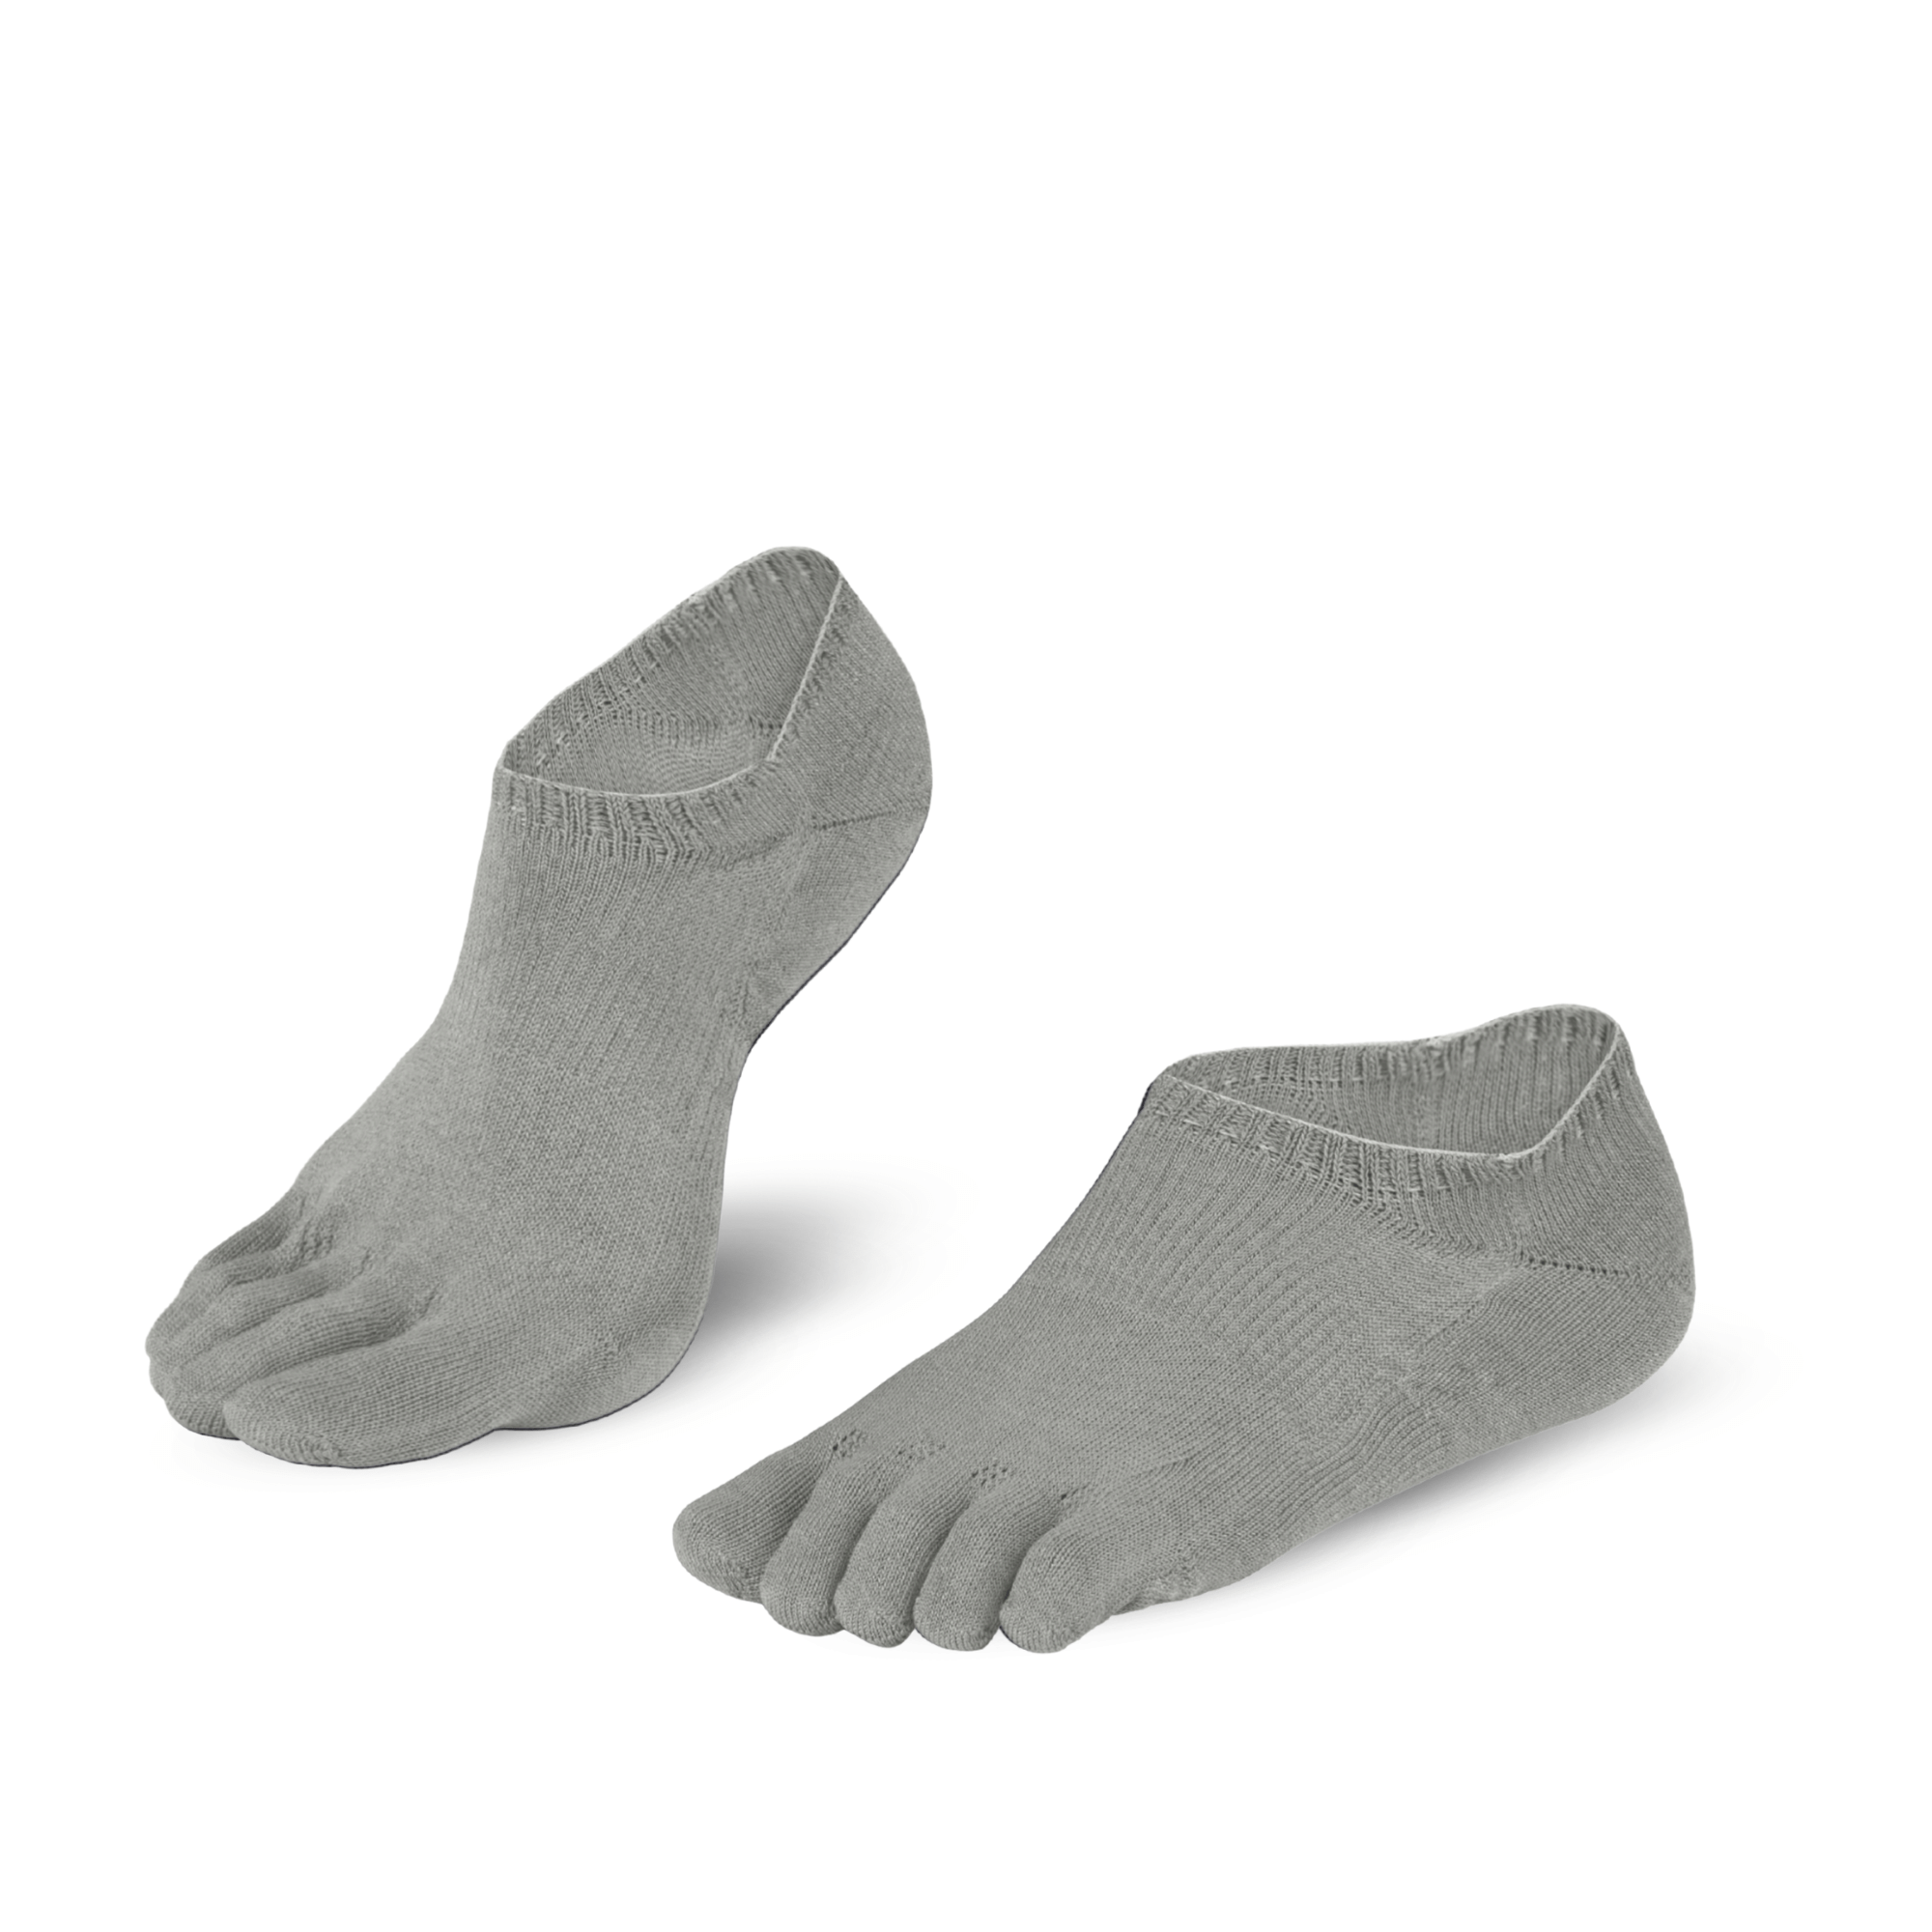 Track and Trail Running Mates Sneaker chaussettes à orteils gris sport